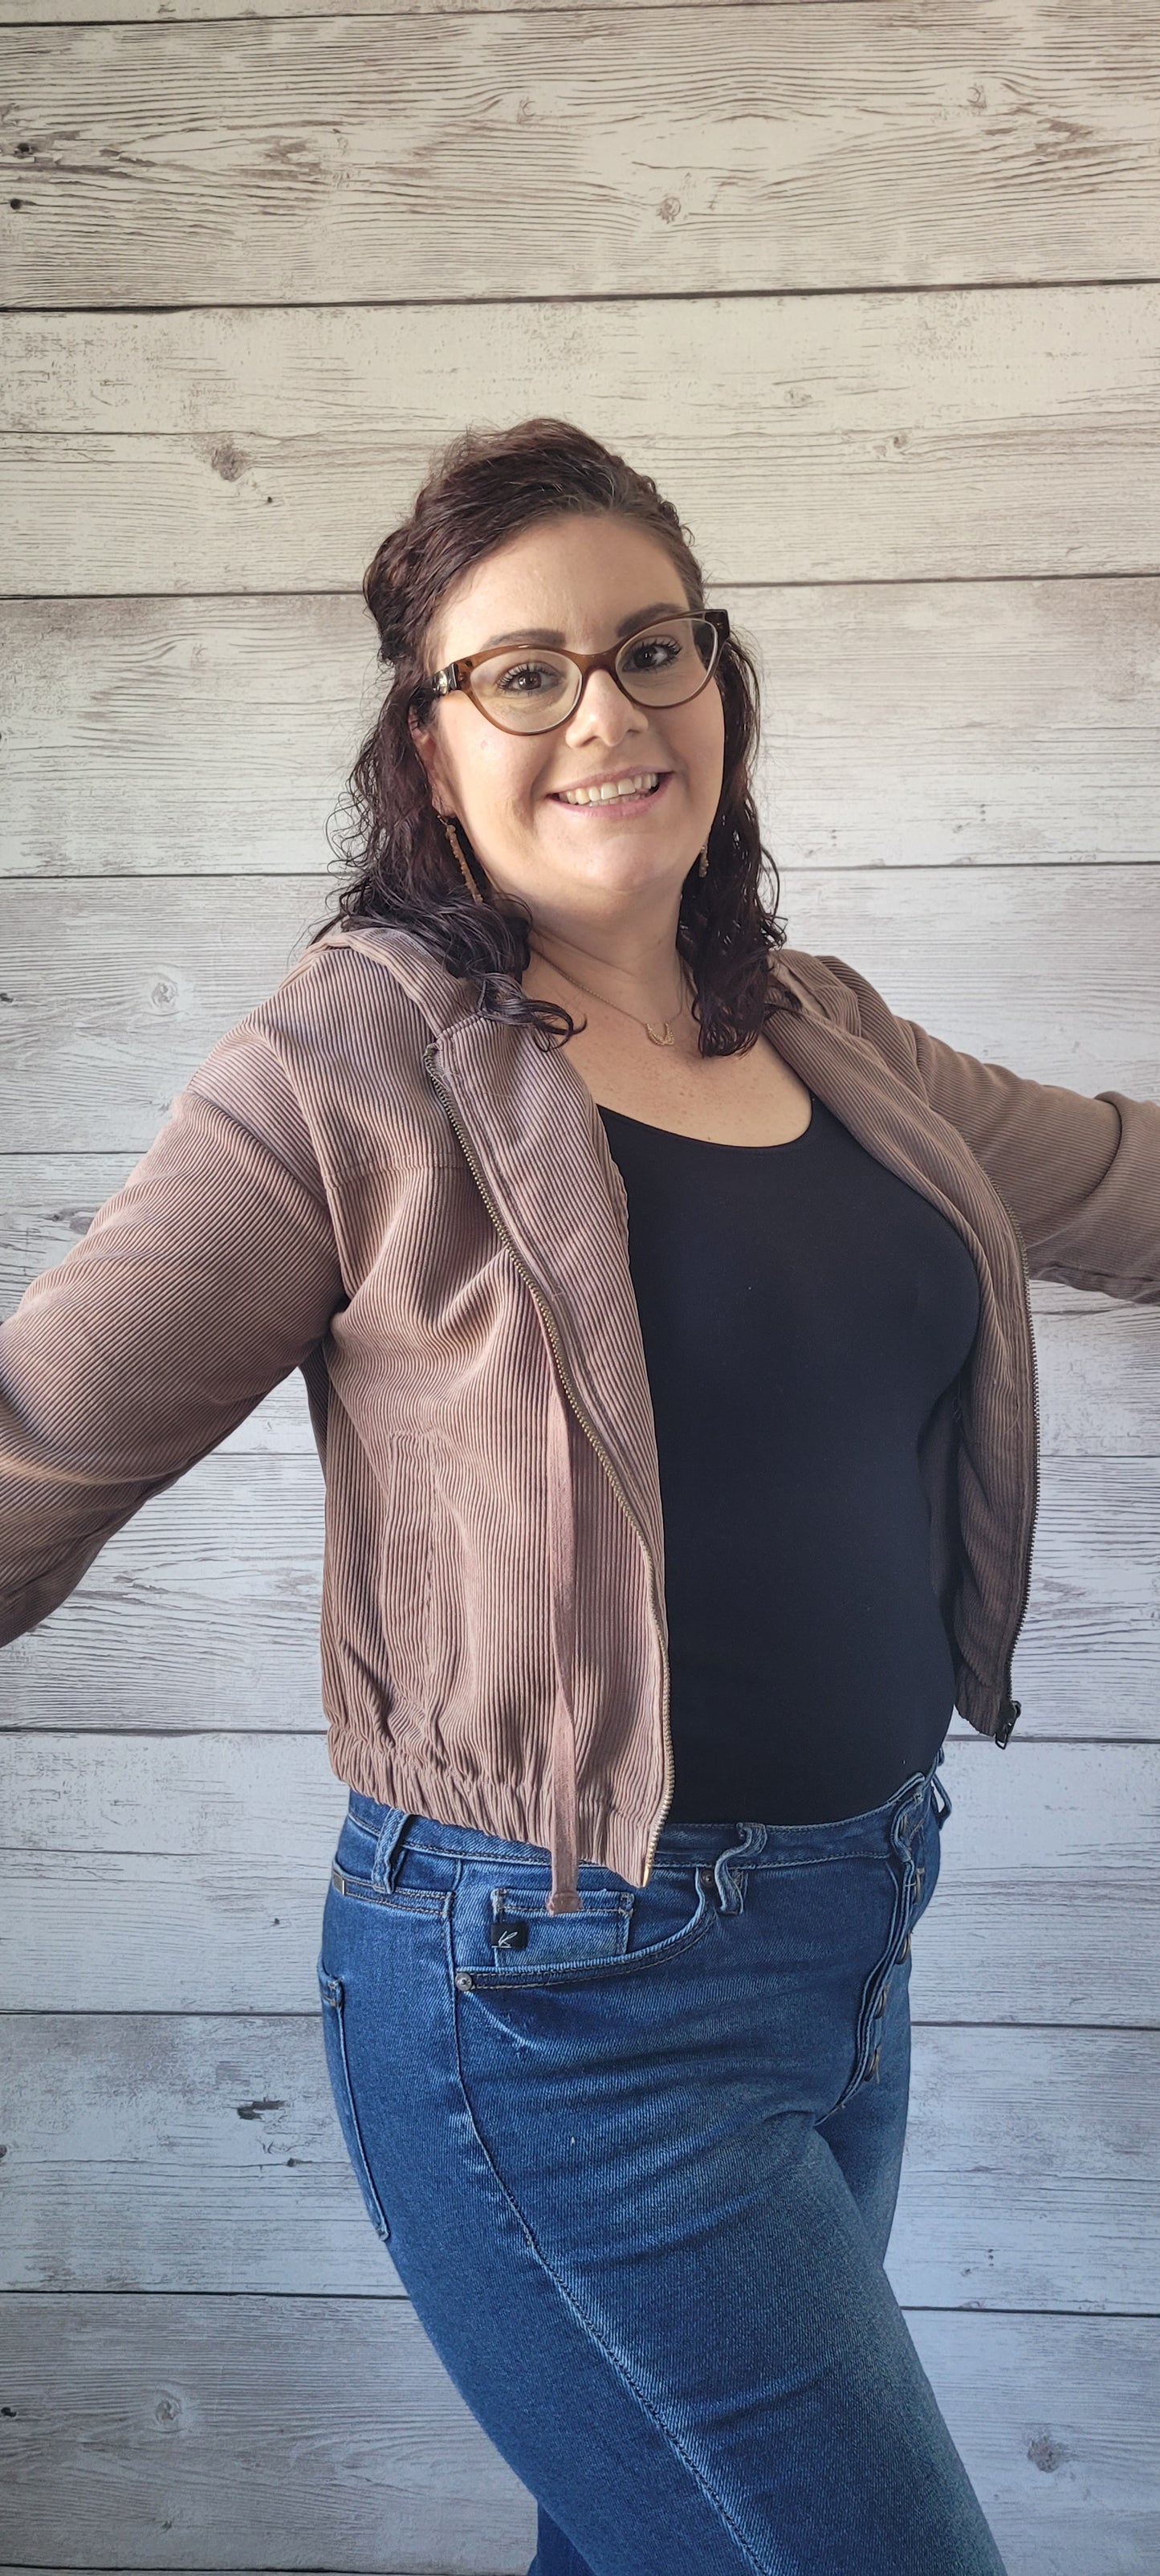 Be cozy and cool with our "Debra Mocha Corduroy Jacket"! With a zipper front, elastic sleeves and waist, plus a hood, you'll be sure to stay warm. Side pockets will keep your hands toasty, and the front tie will keep you looking oh-so-stylish. Cute and comfy?! What more can ya ask for? Sizes small through large.